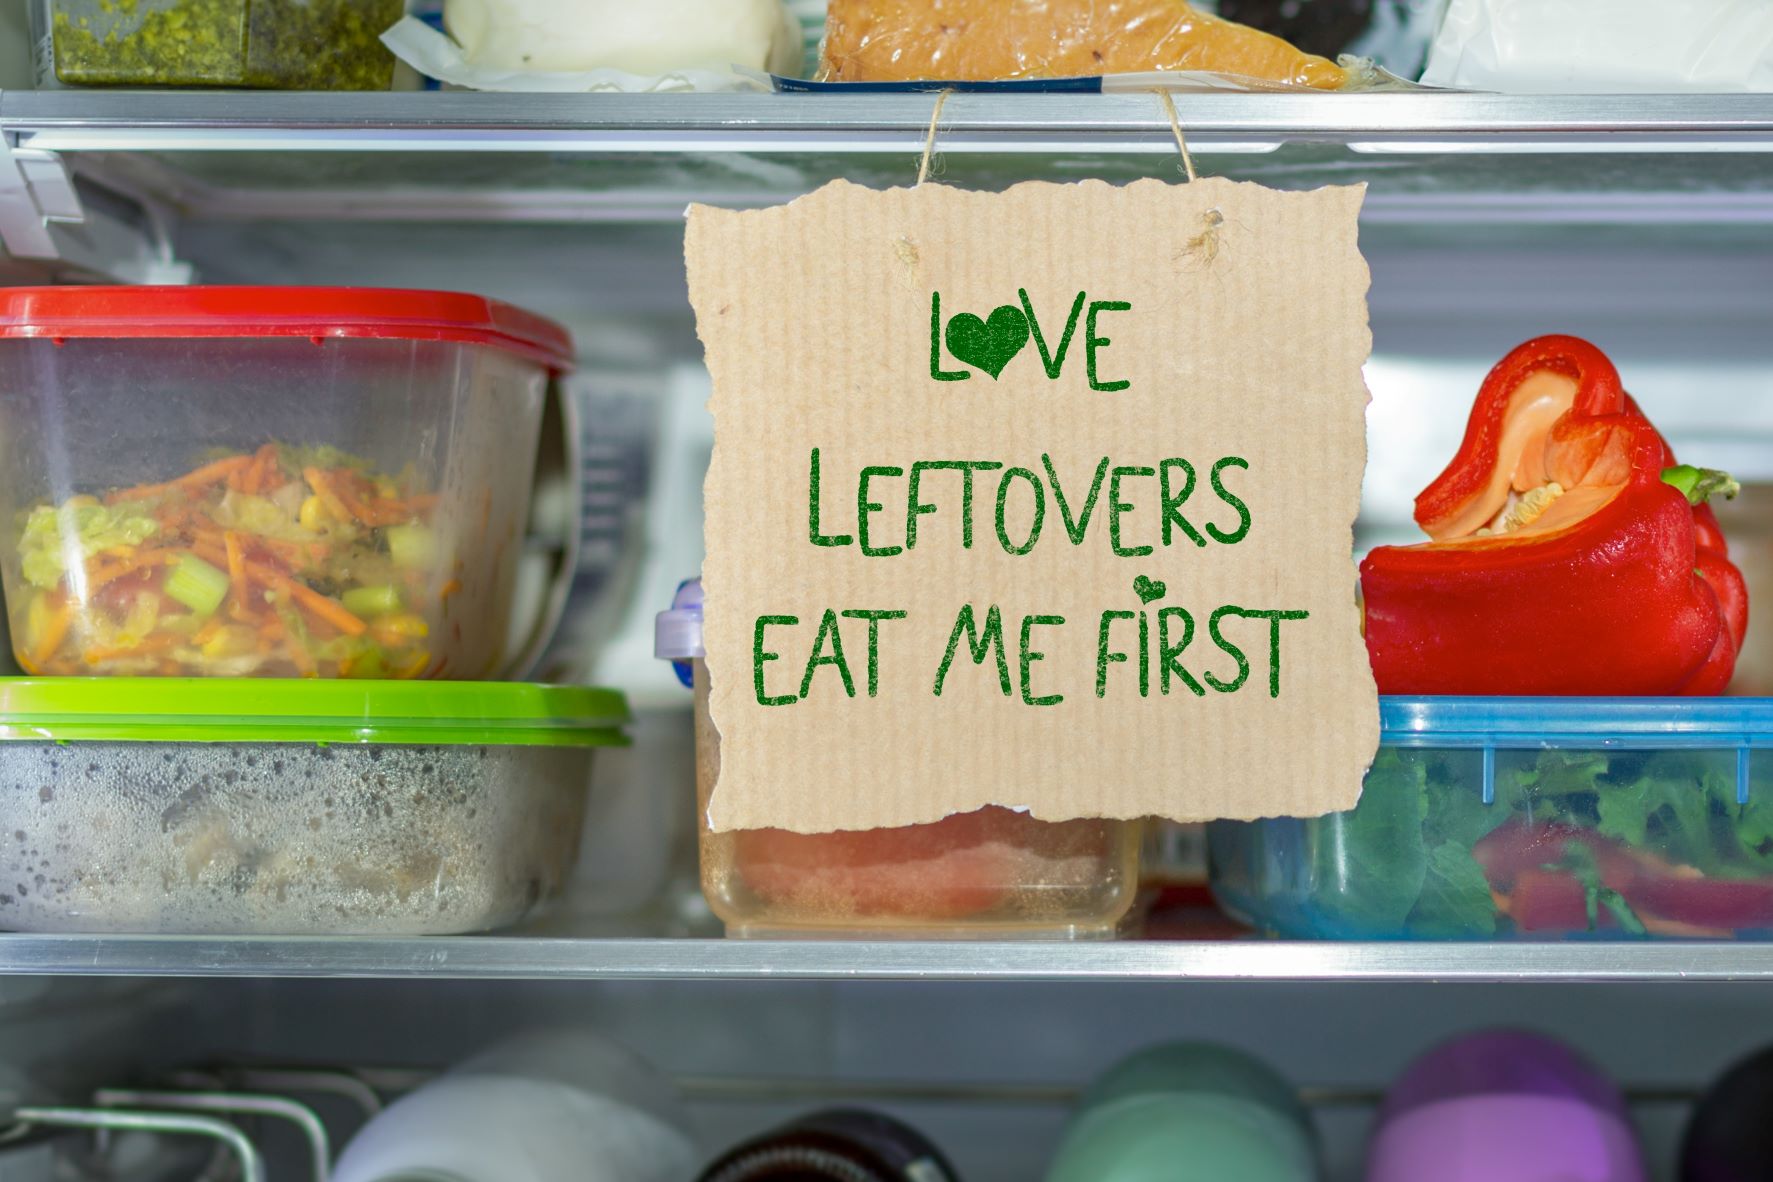 Fridge interior with 'Love Leftovers Eat Me First' label hanging from a shelf